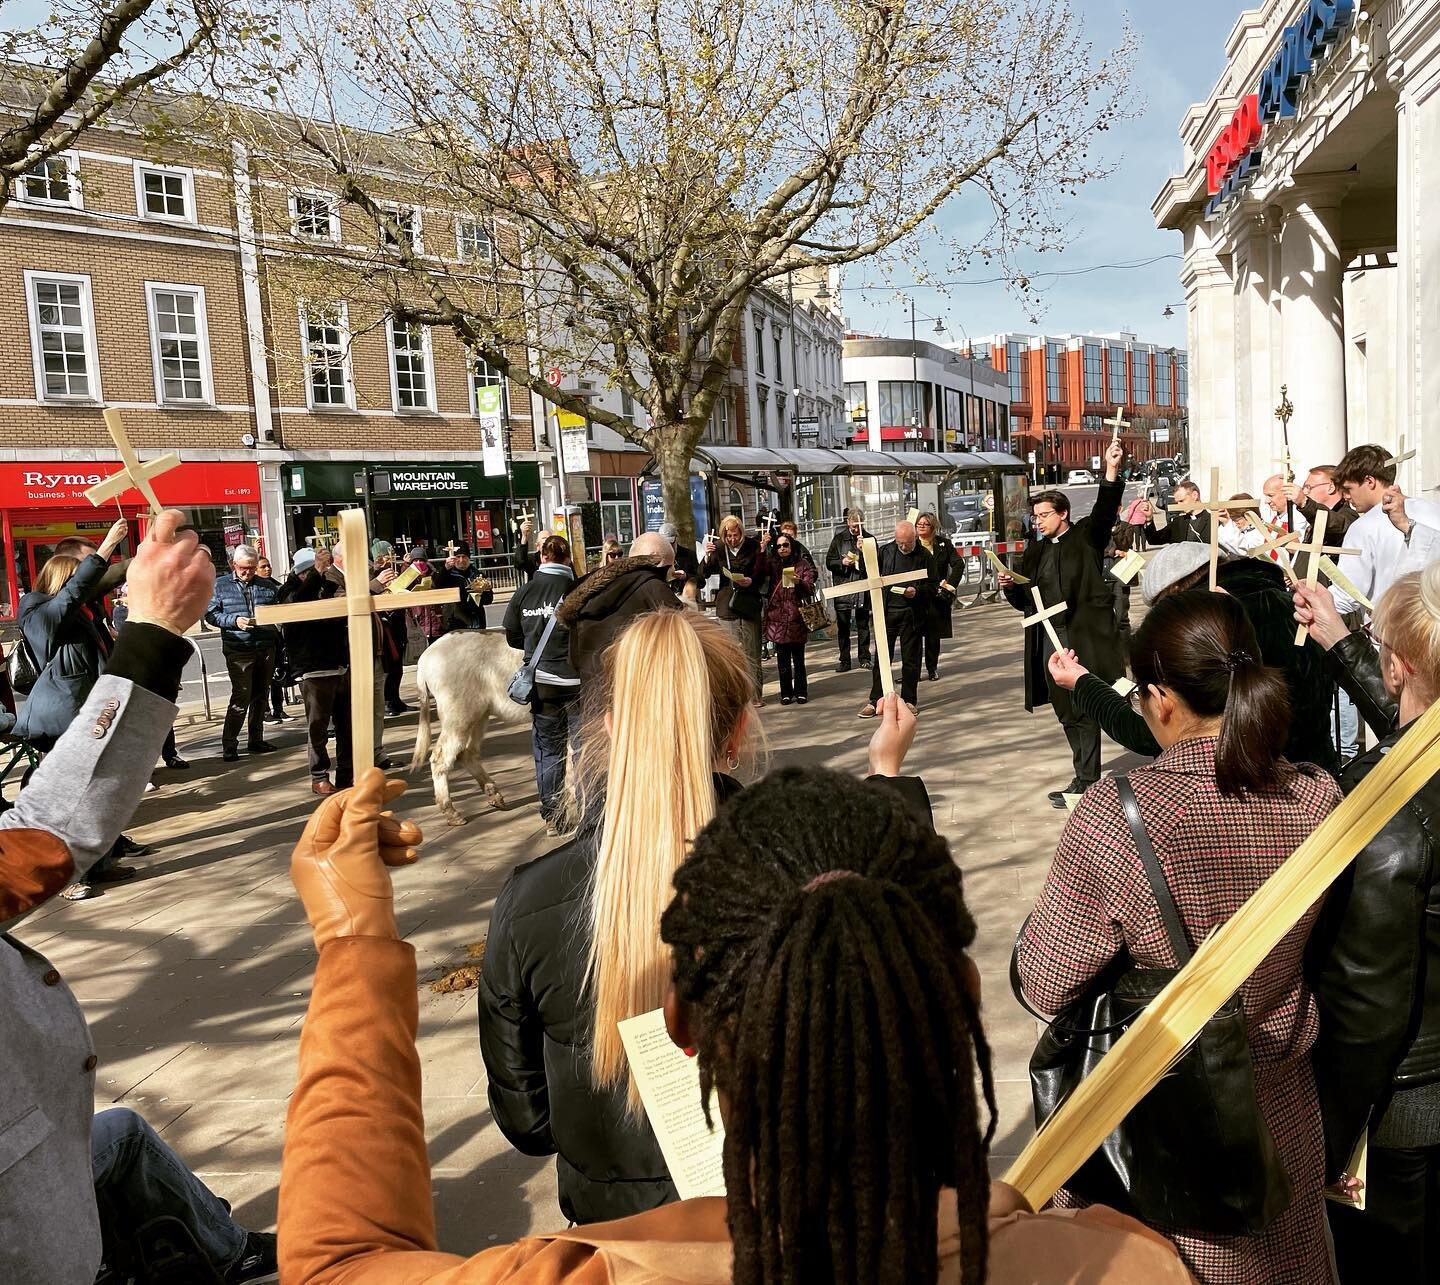 What a joy it was to celebrate Palm Sunday with our neighbouring churches in Wimbledon town centre last weekend. 

&ldquo;And the crowds that went before him and that followed him were shouting, &ldquo;Hosanna to the Son of David! Blessed is he who c